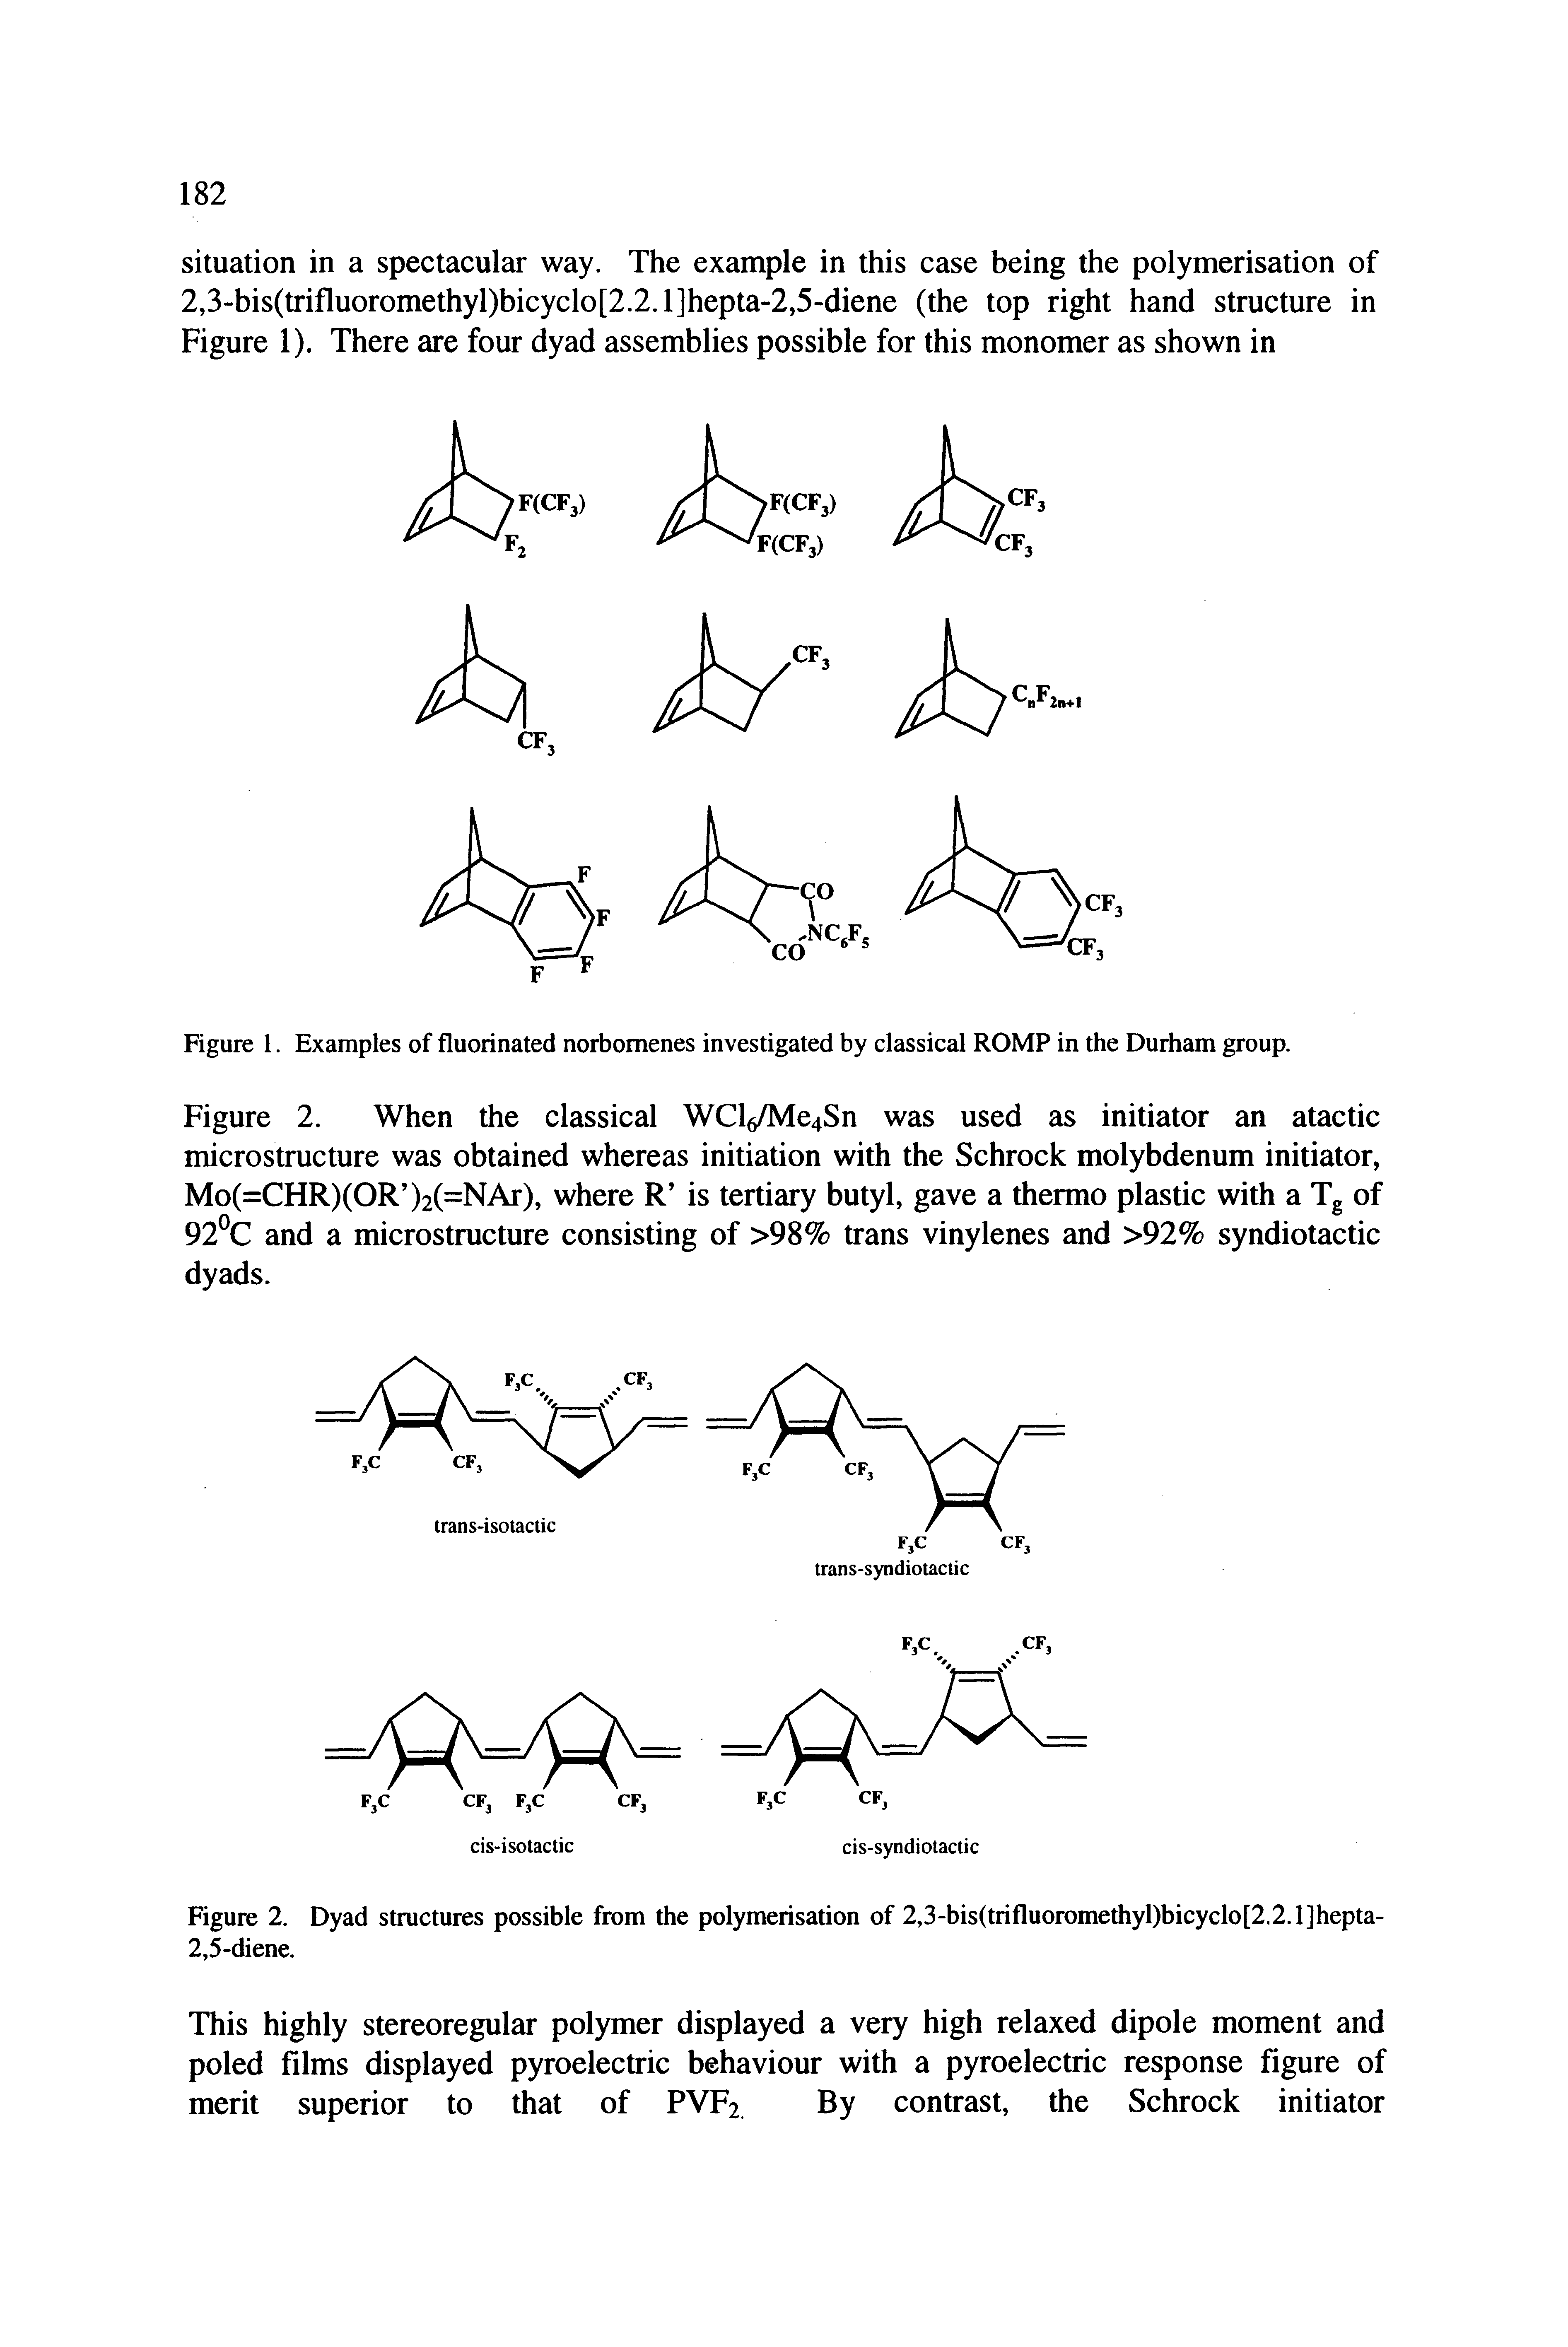 Figure 1. Examples of fluorinated norbomenes investigated by classical ROMP in the Durham group.